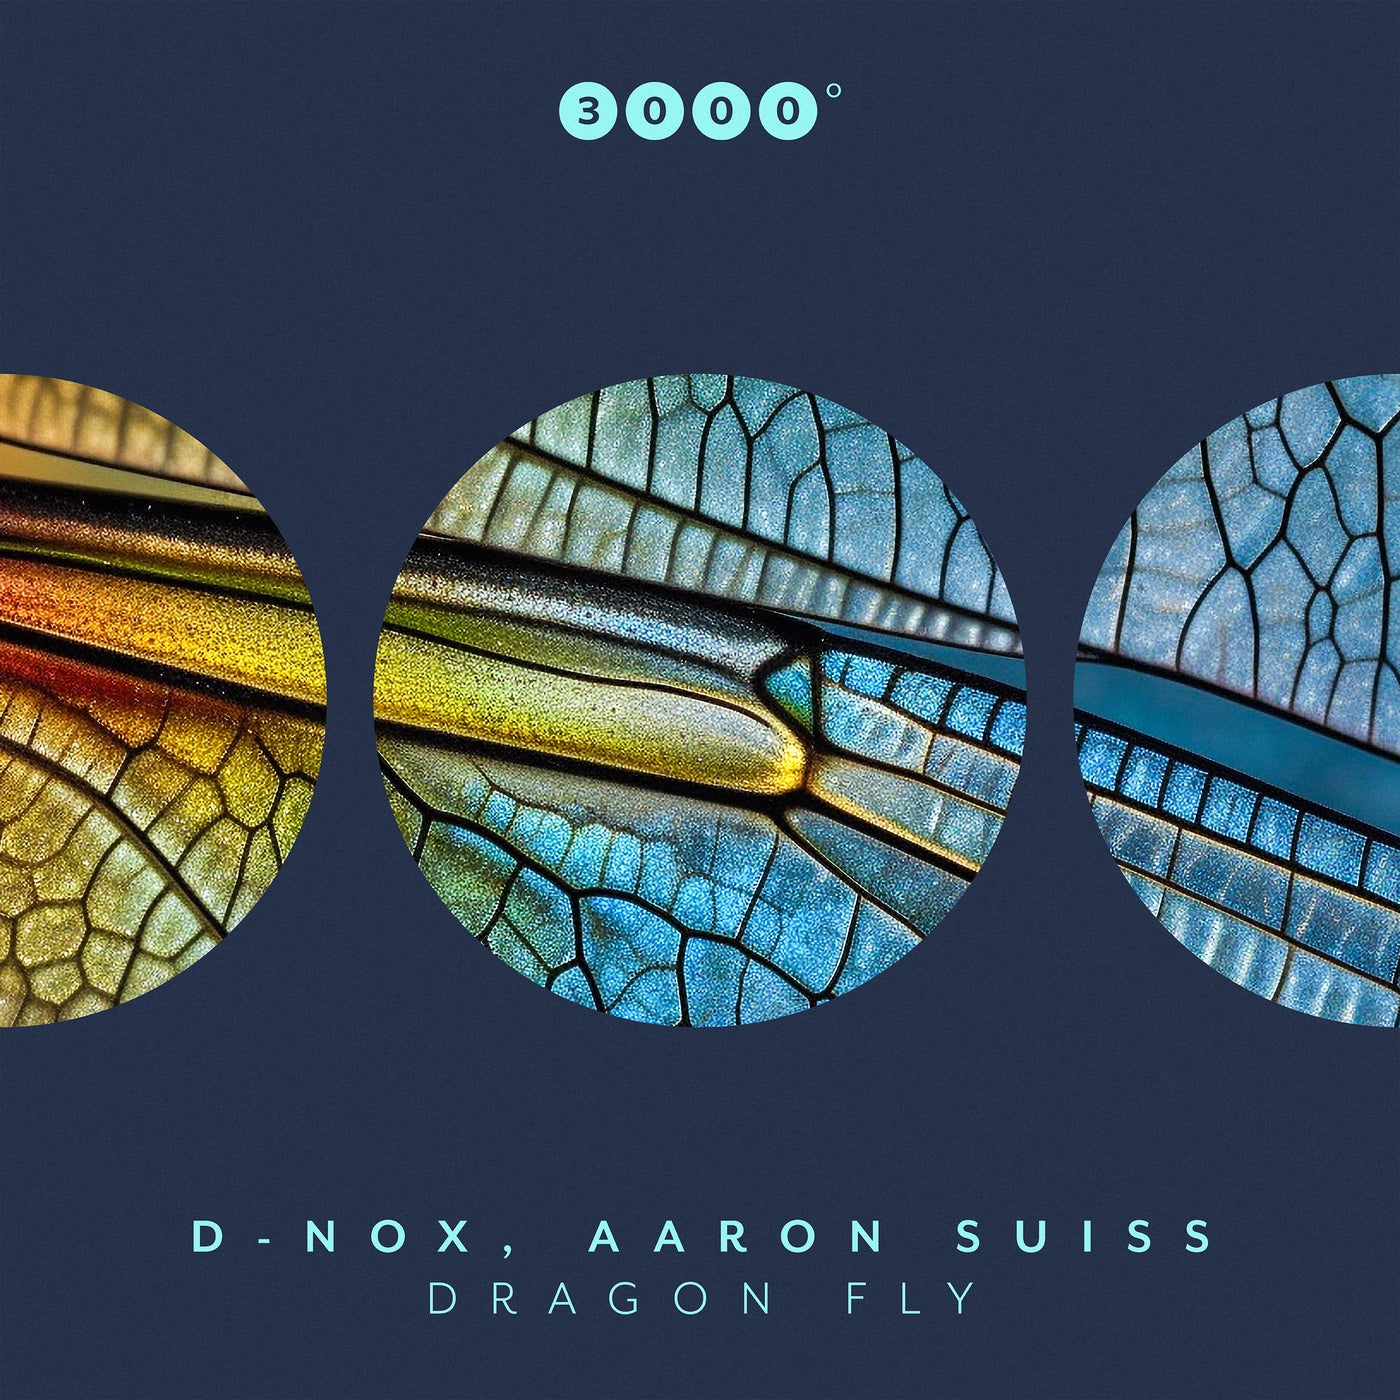 image cover: D-Nox, Aaron Suiss - Dragon Fly on 3000 Grad Records